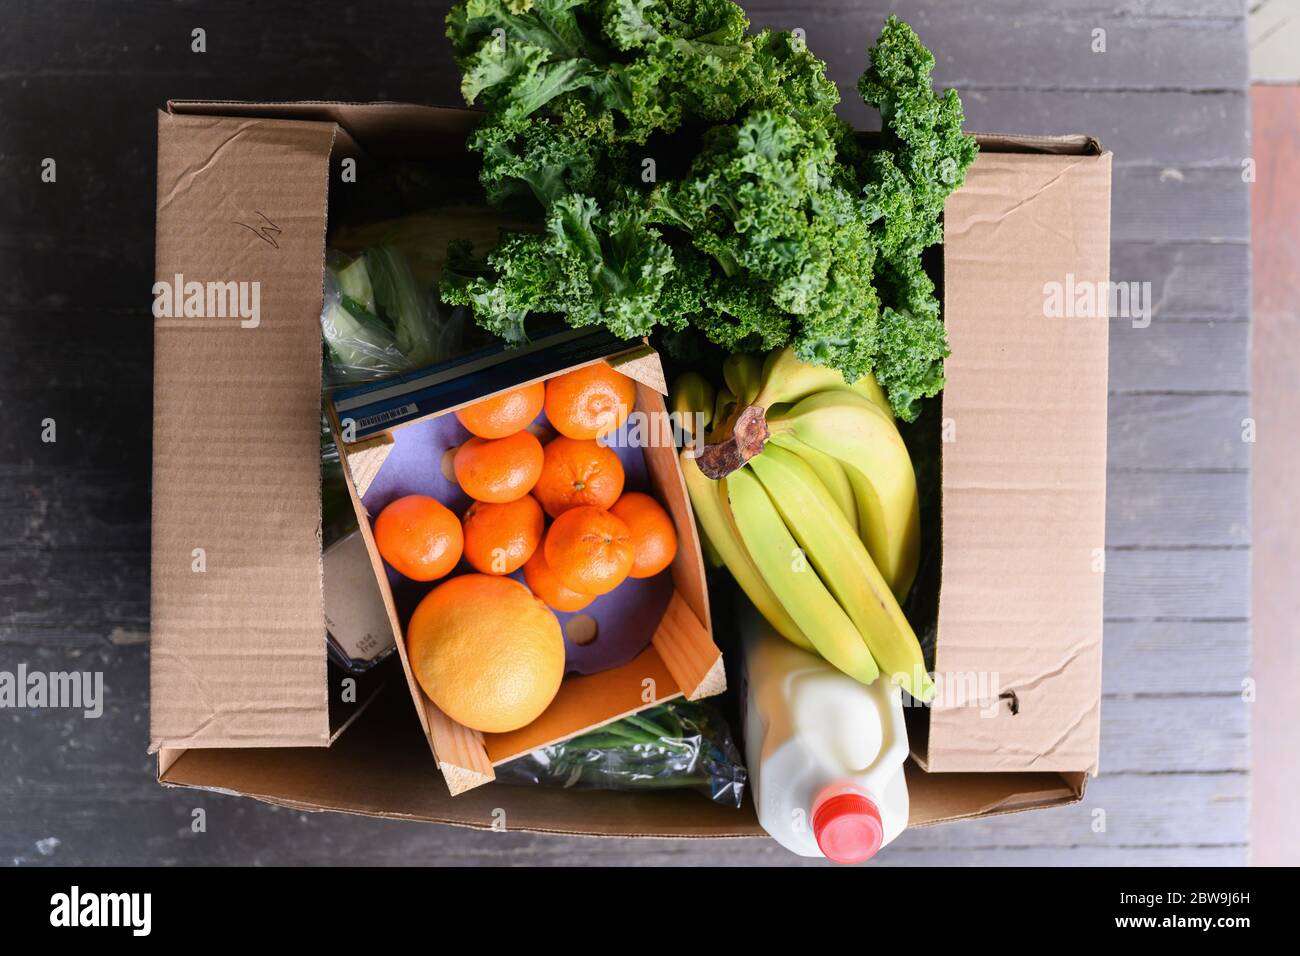 Overhead view of box of delivered produce on house porch Stock Photo